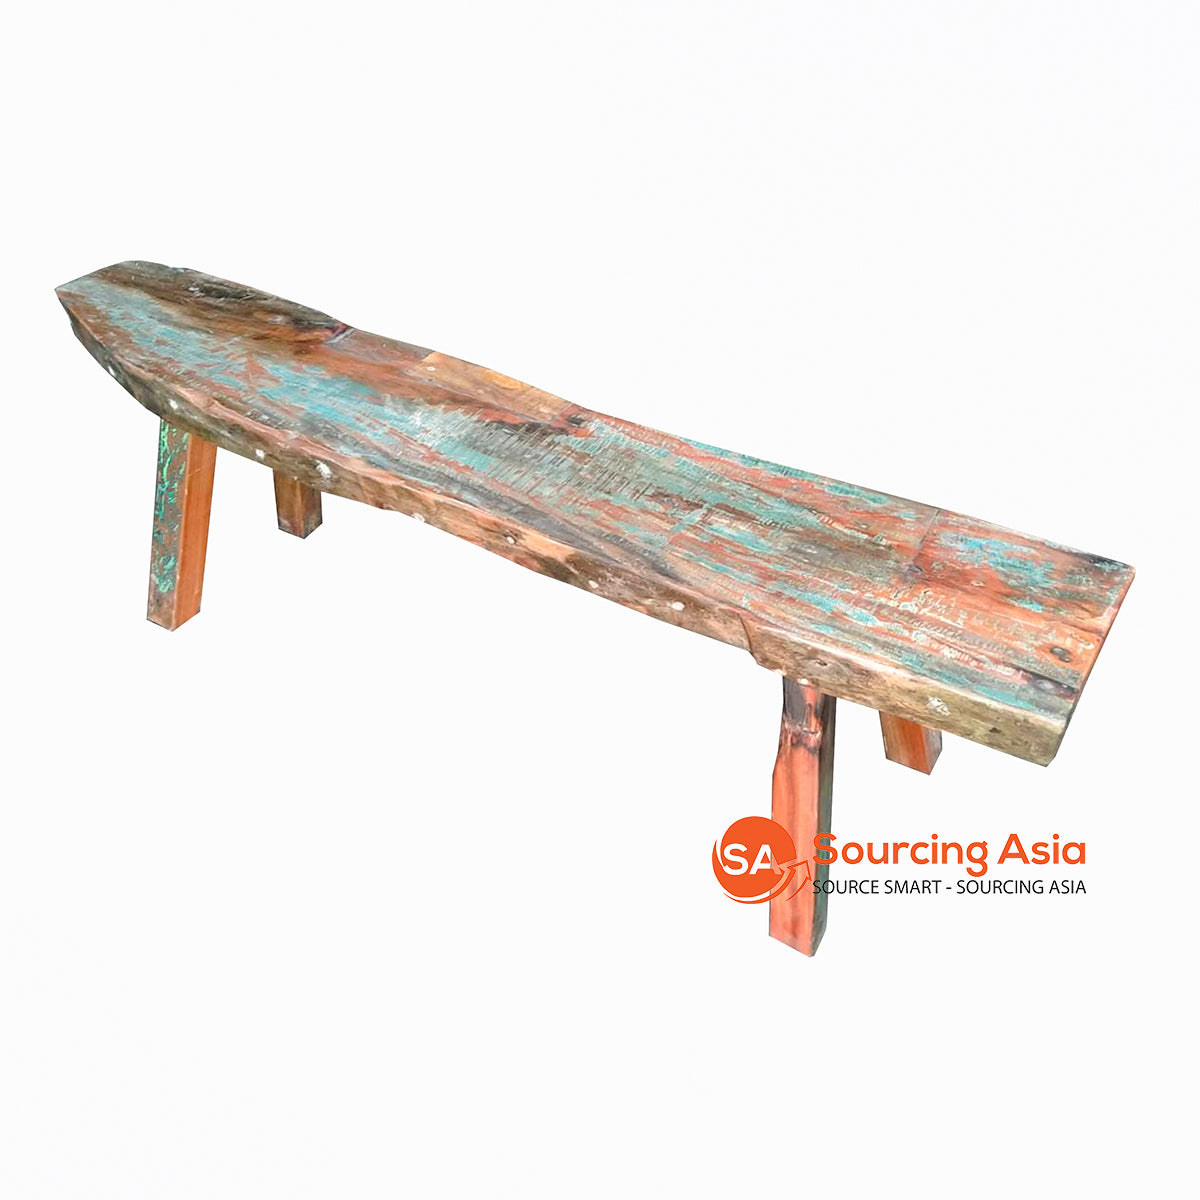 FAK48 RECYCLED BOAT BENCH